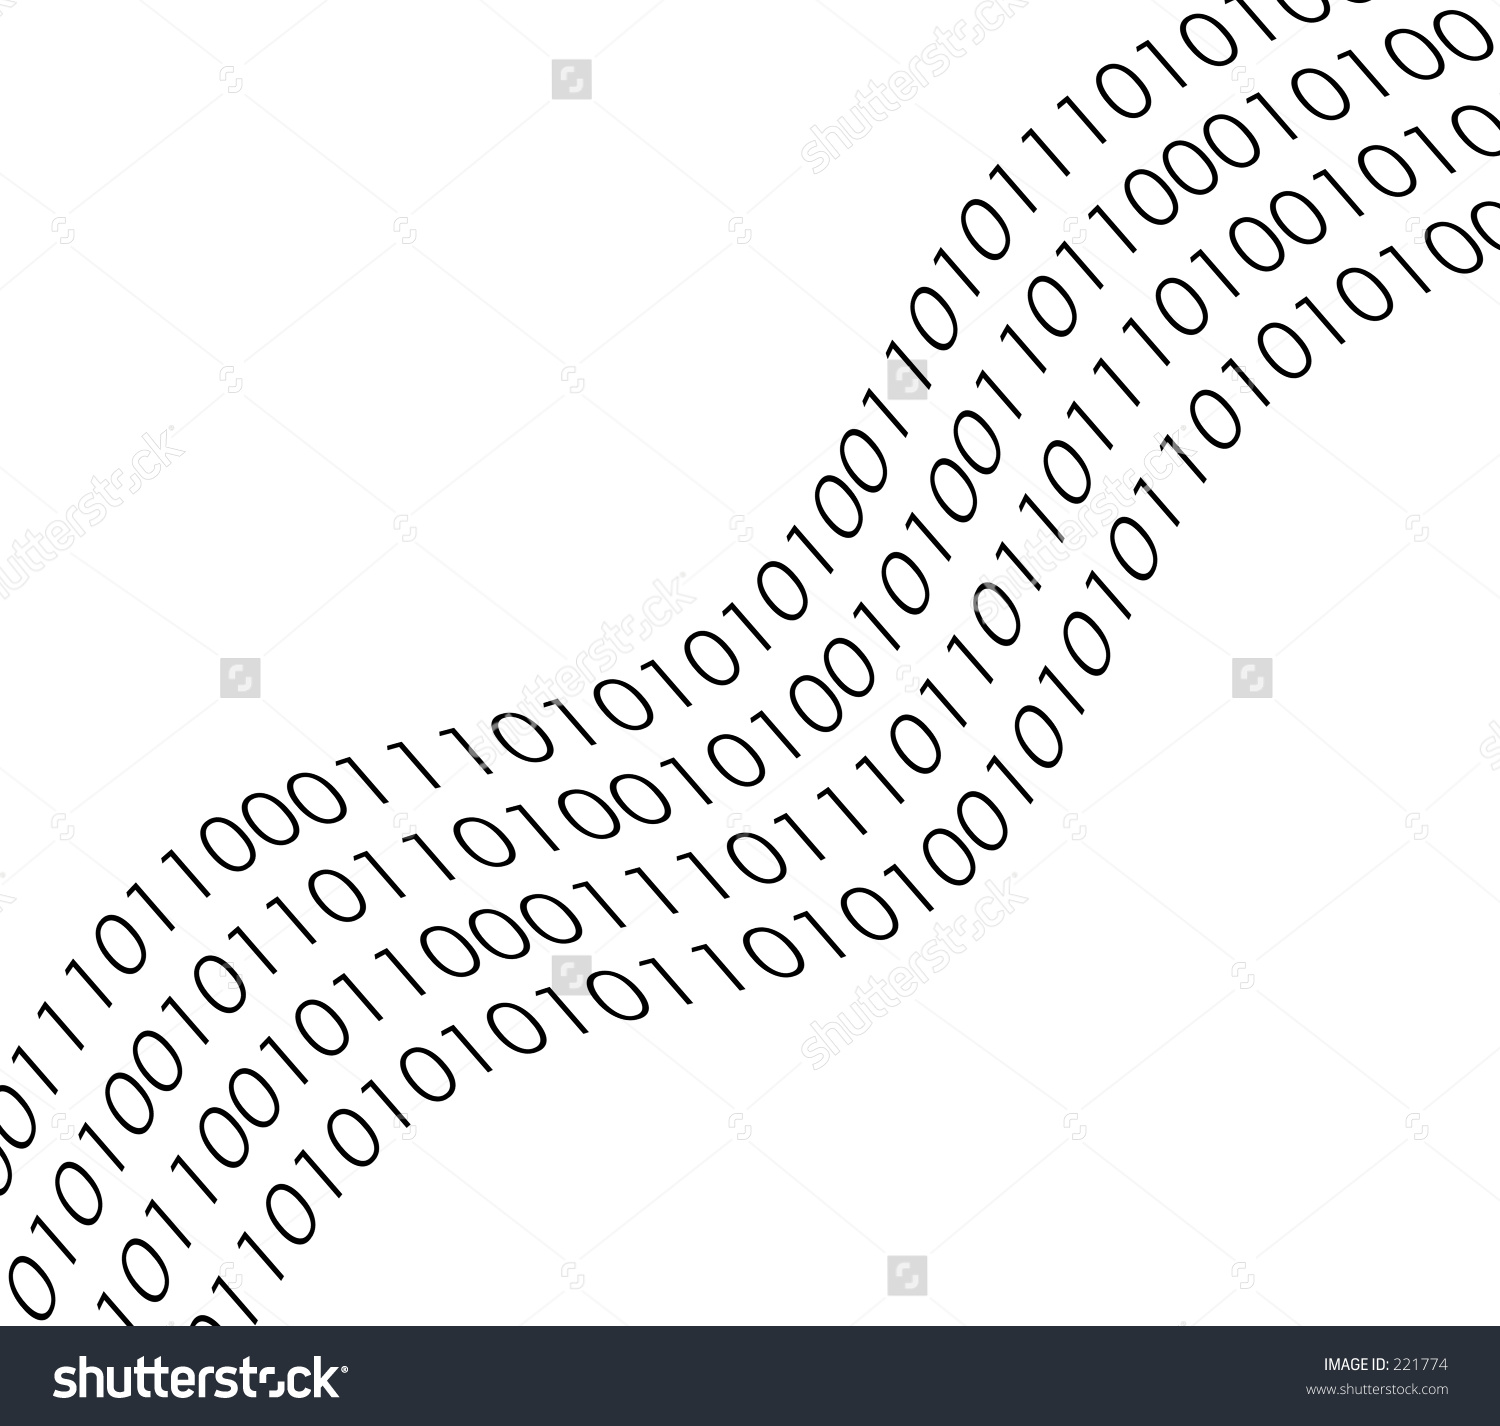 Curved Stream Binary Numbers Stock Photo 221774.